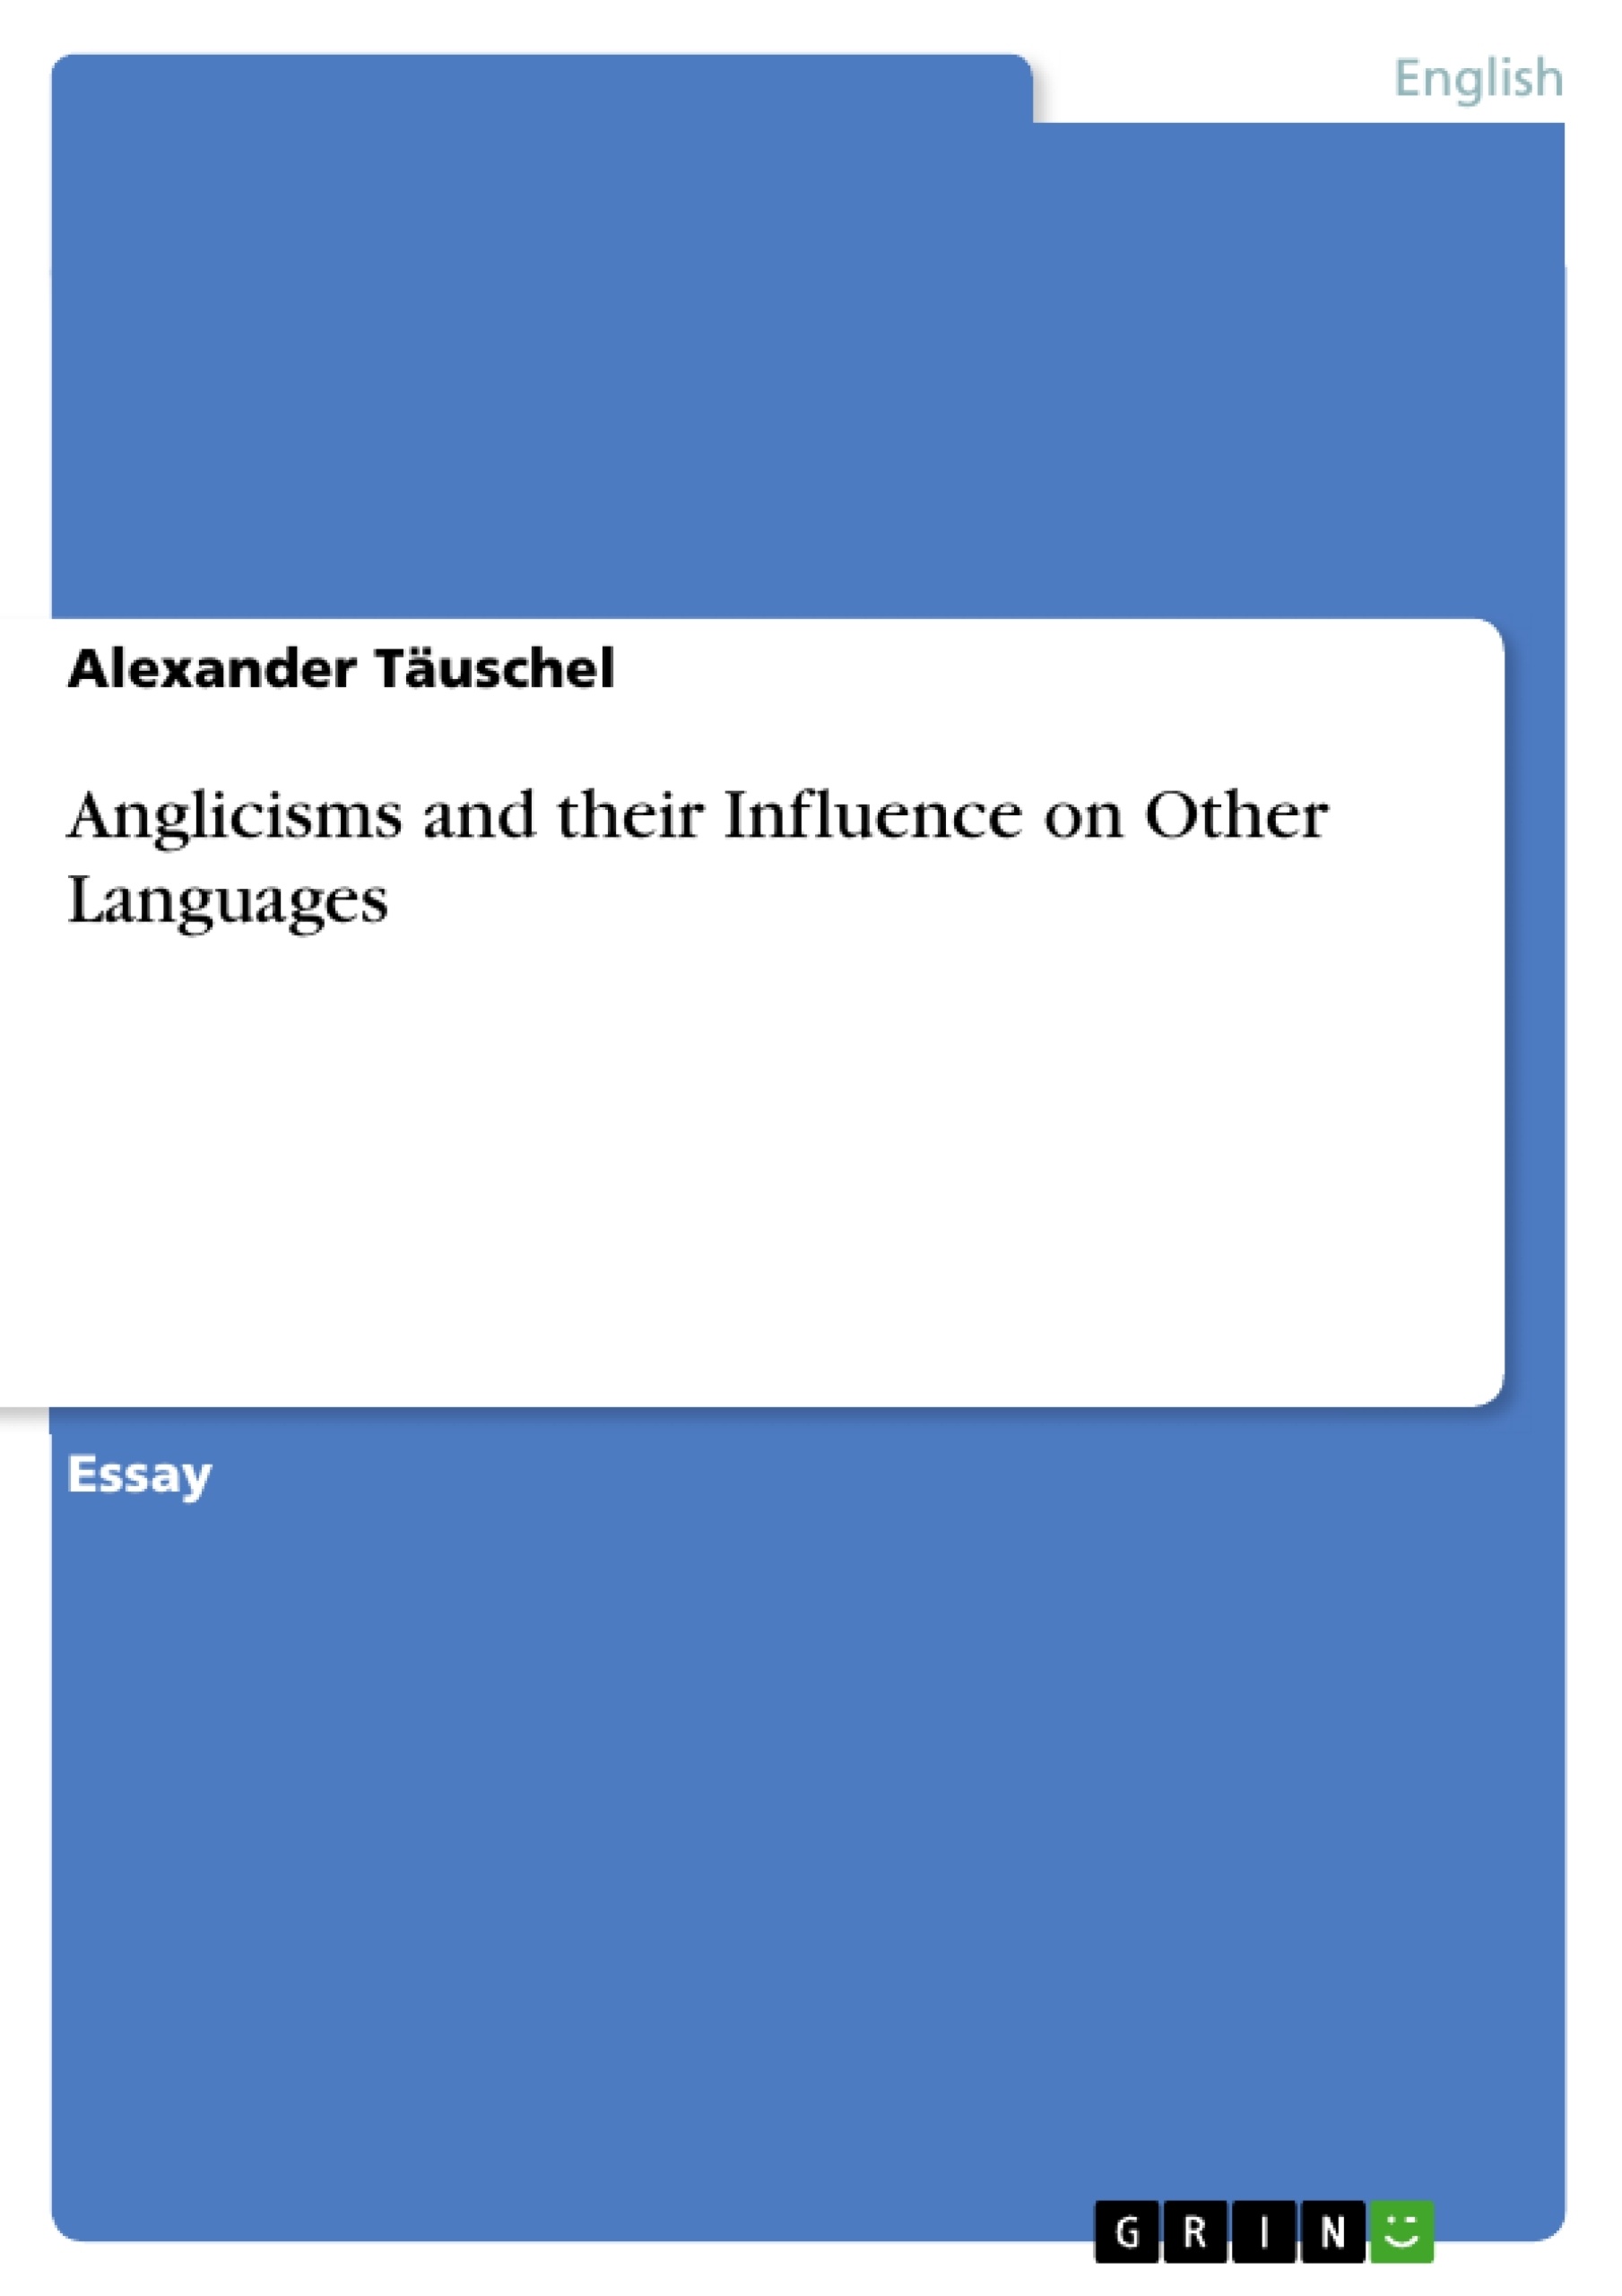 Título: Anglicisms and their Influence on Other Languages